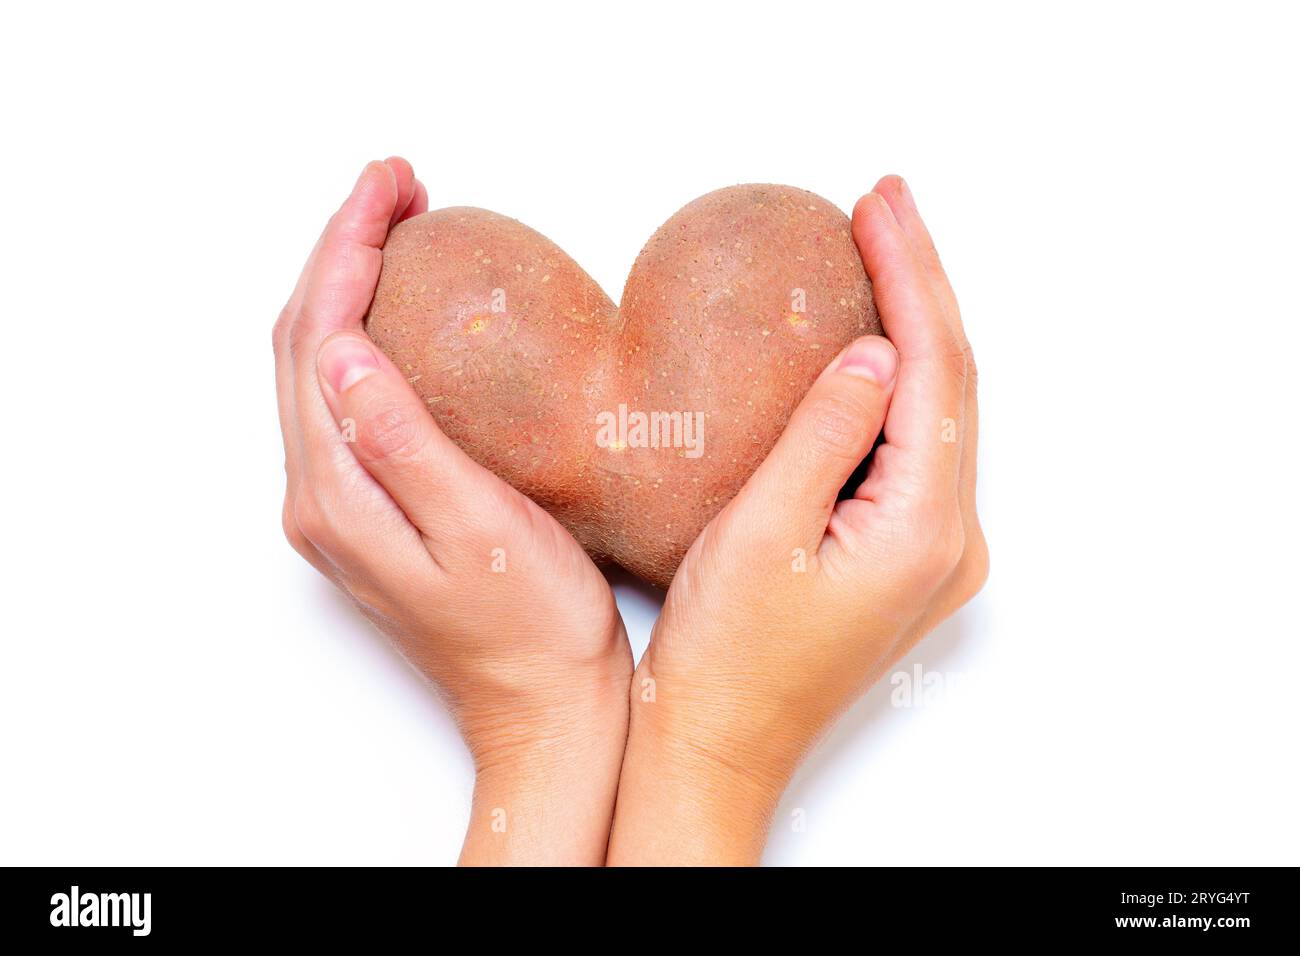 Large heart-shaped potato cradled in cupped hands isolated on white. Heartwarming produce related concept. Stock Photo